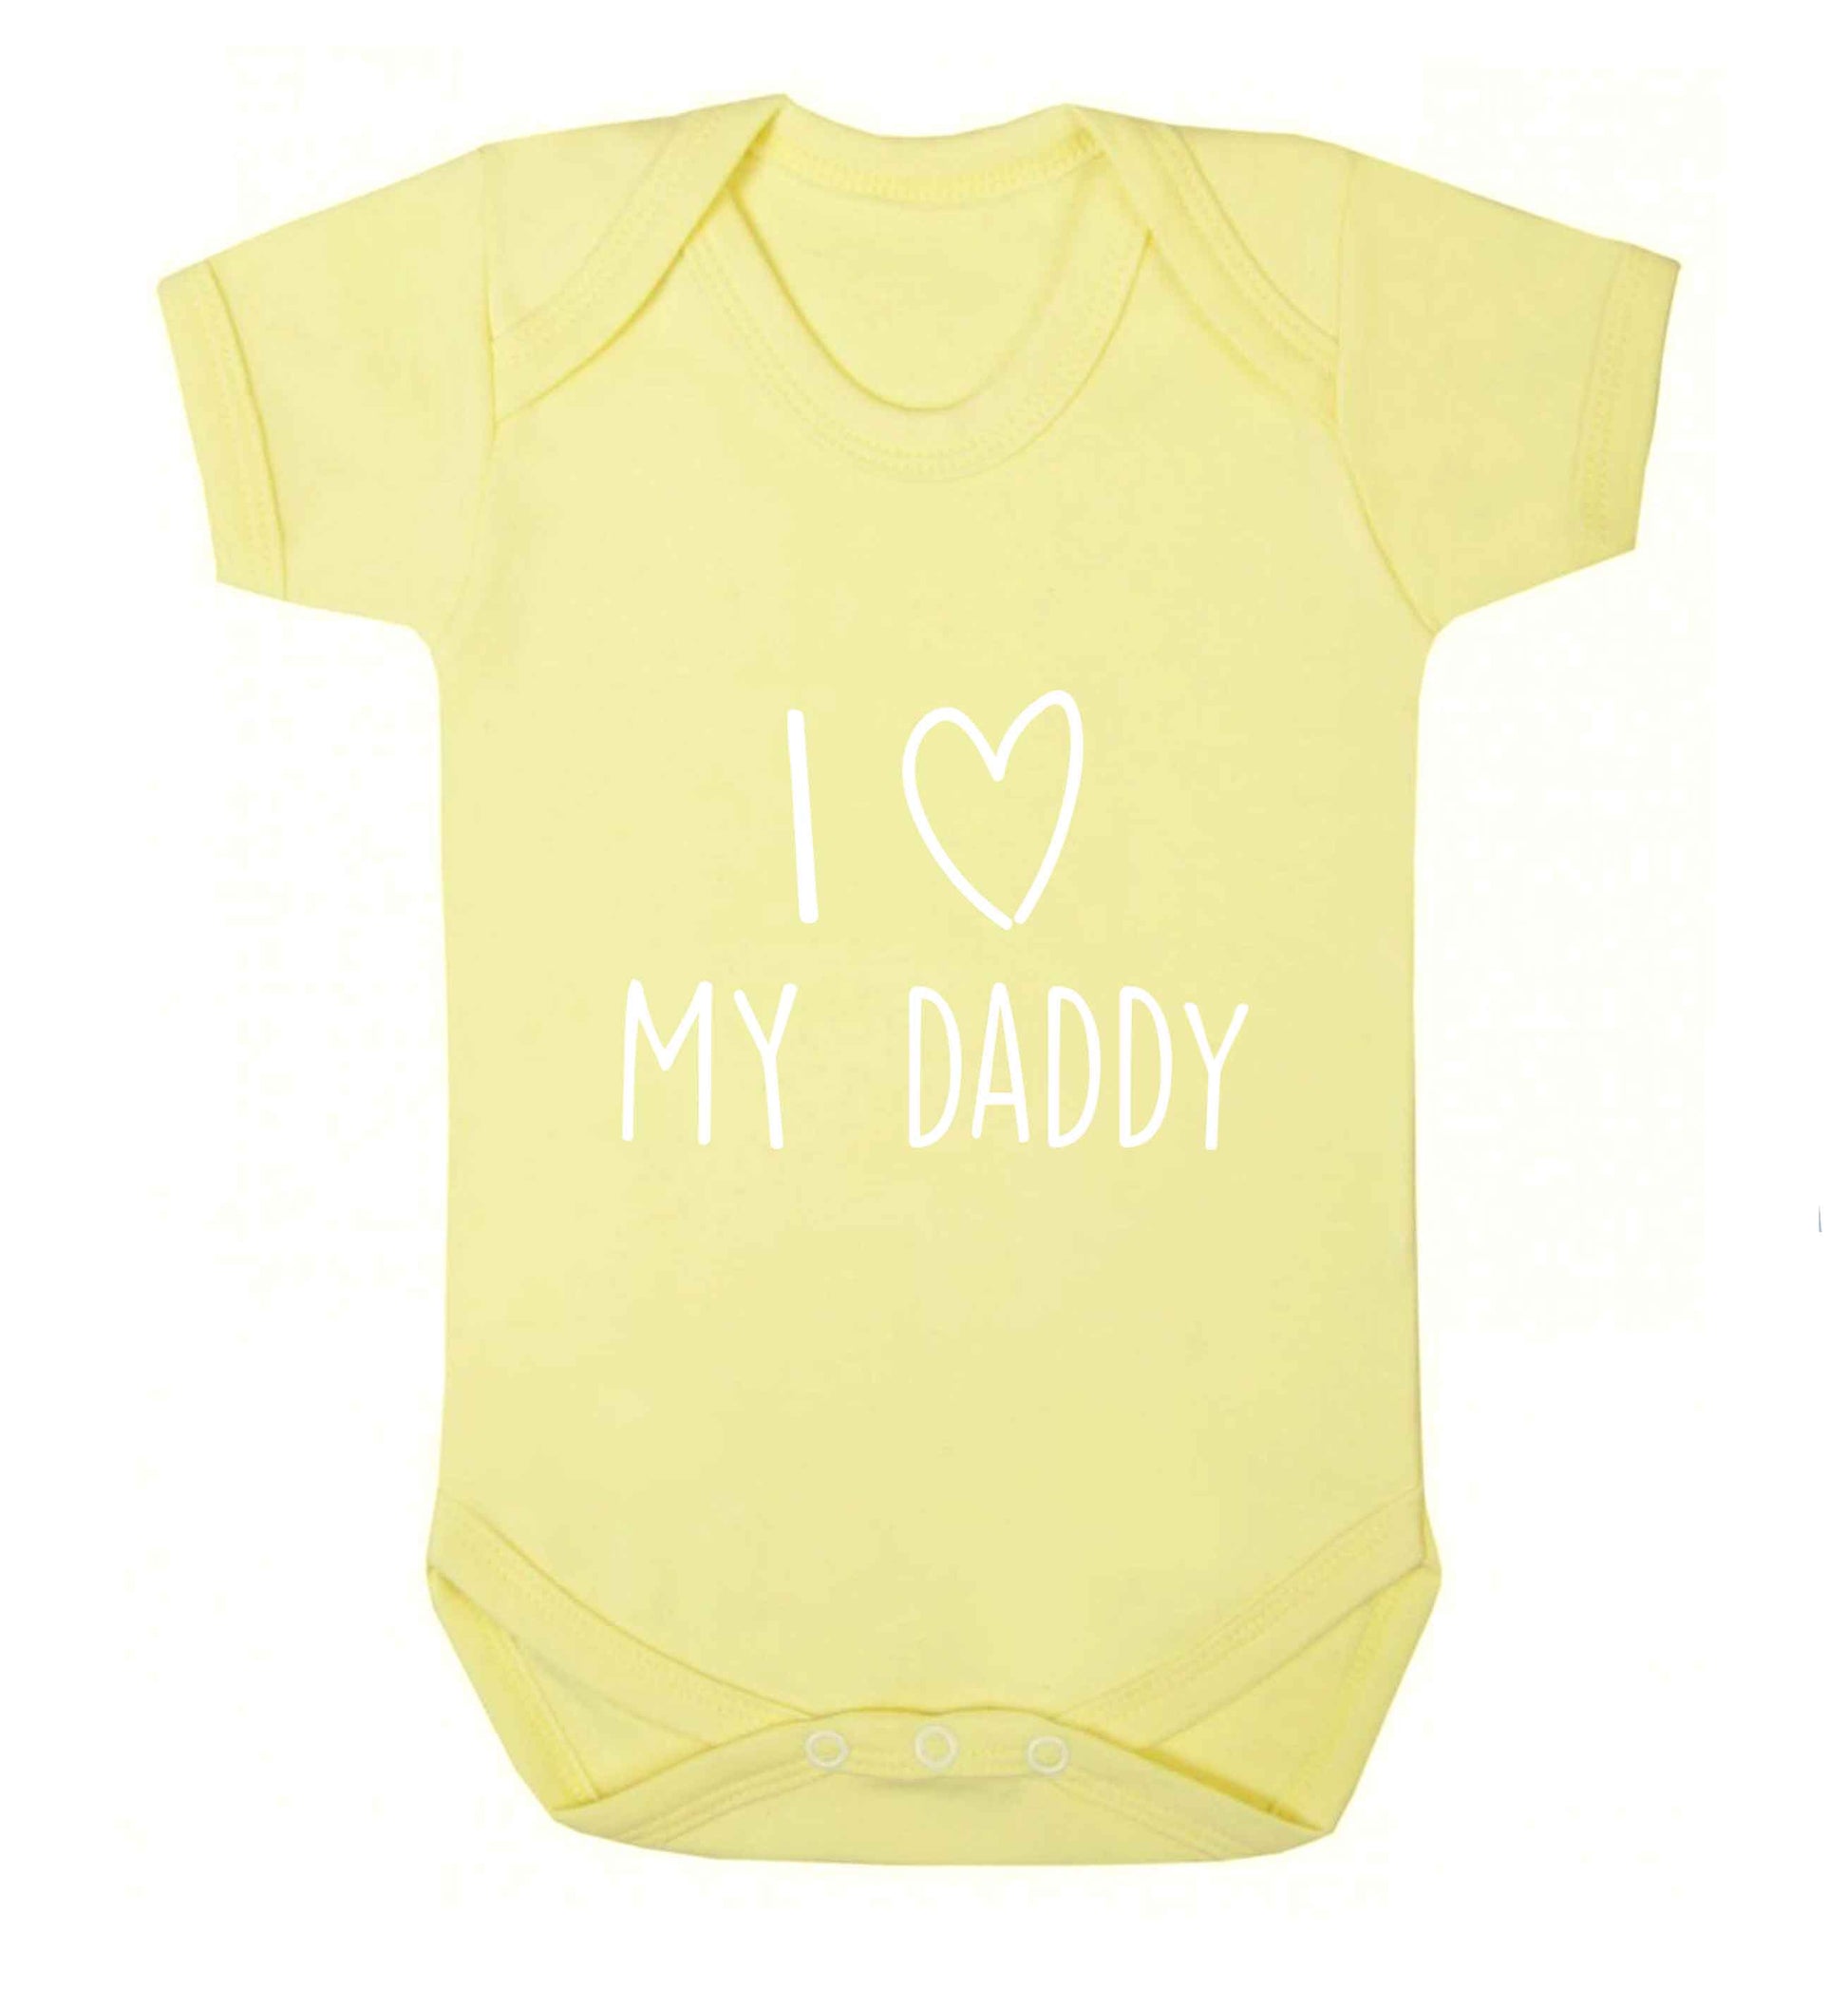 I love my daddy baby vest pale yellow 18-24 months